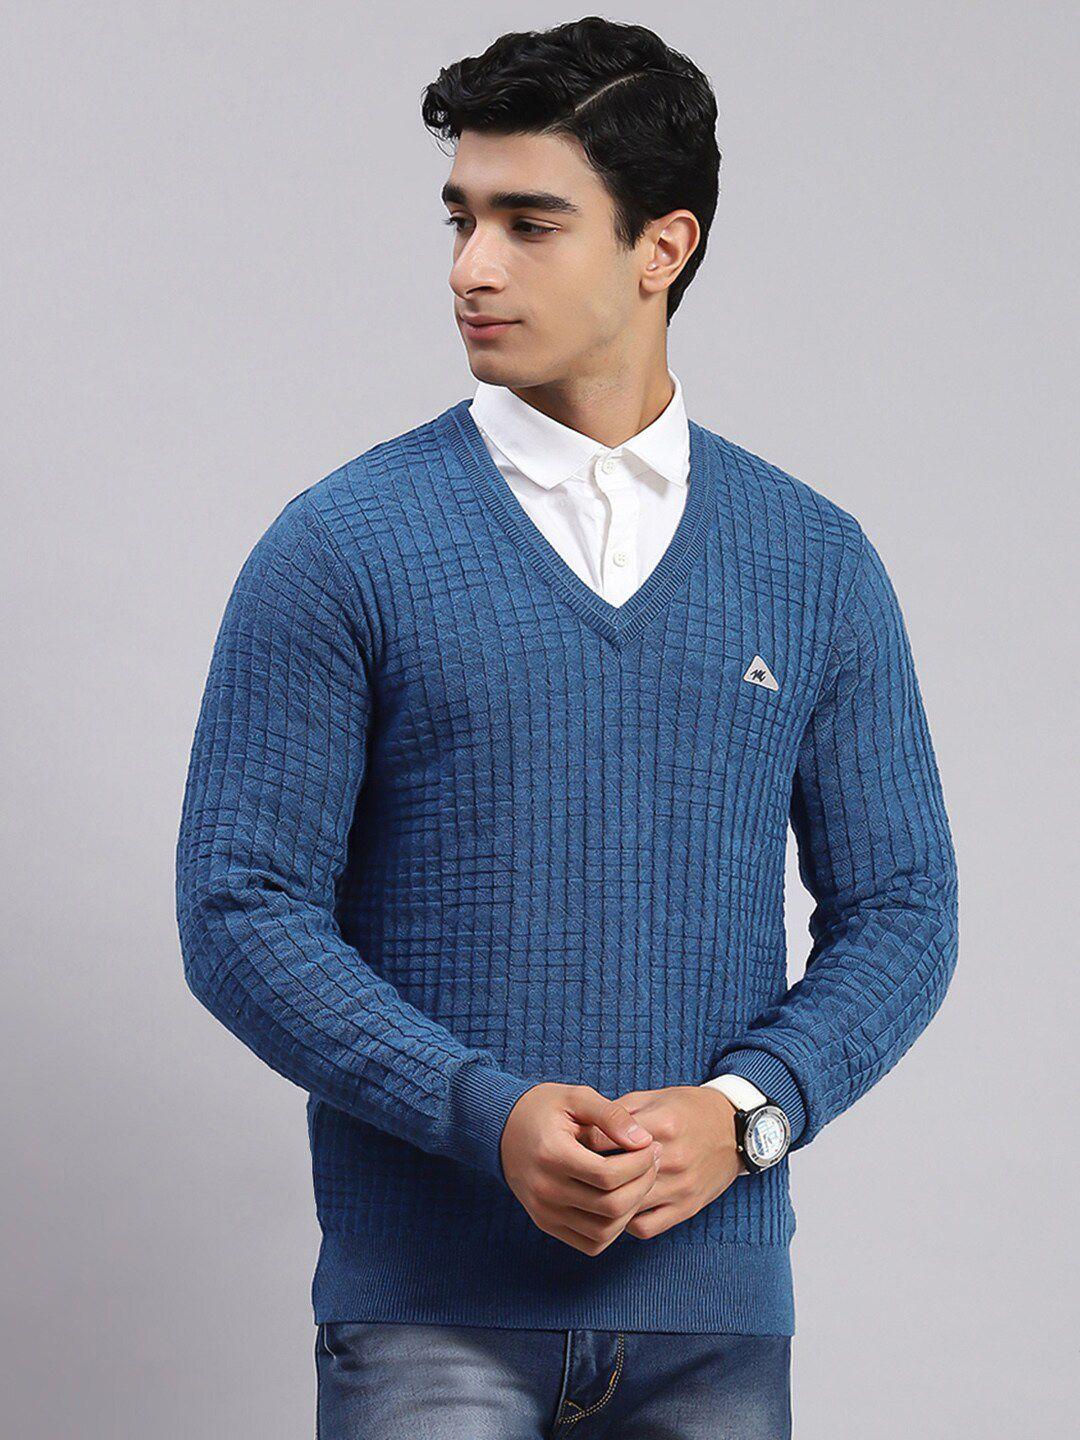 monte carlo cable knit self design v-neck woollen pullover sweater